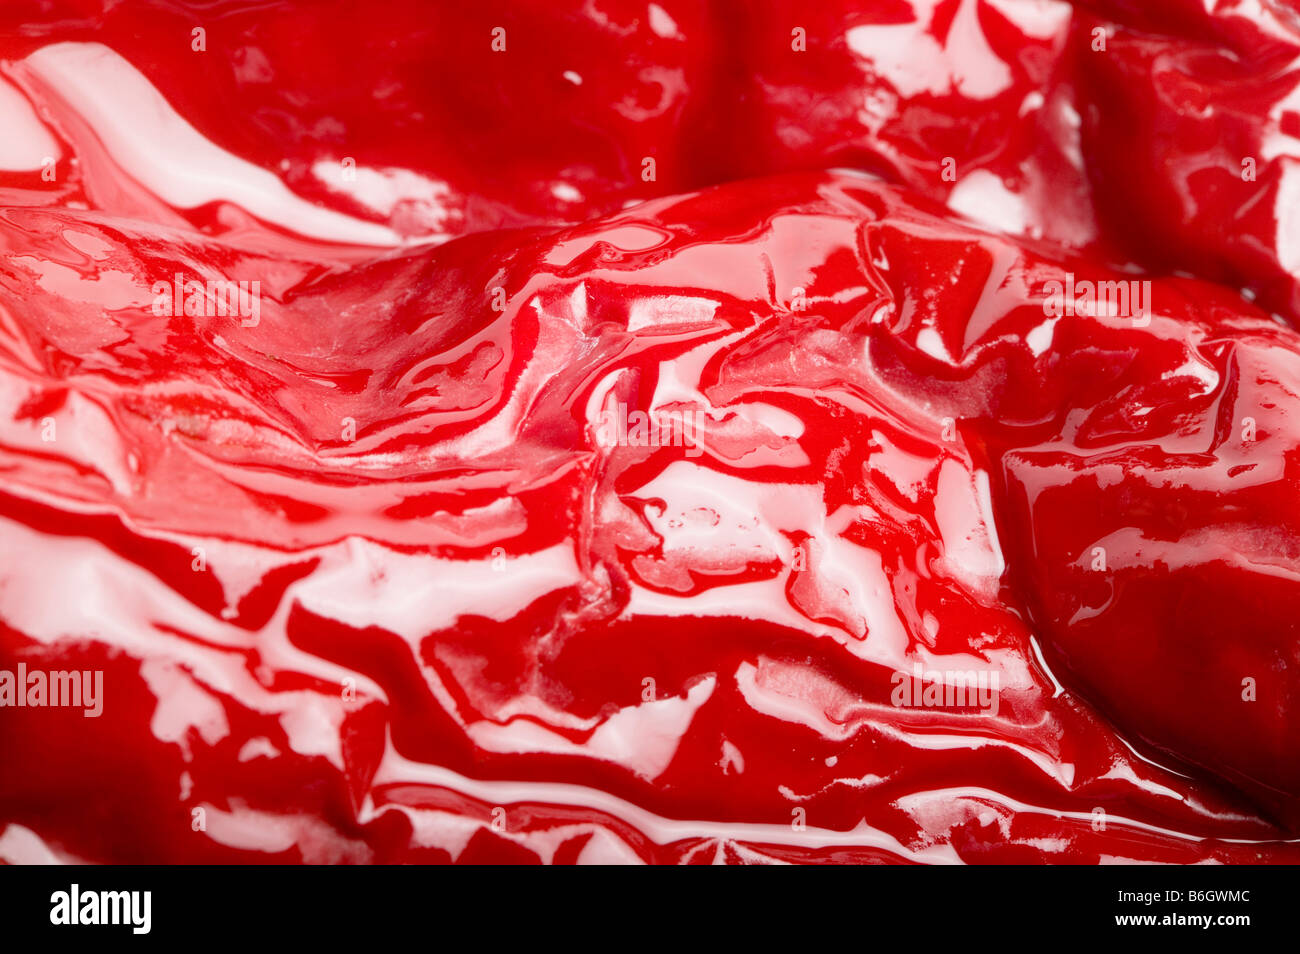 Close up of the skin of a Red Chili Pepper Stock Photo